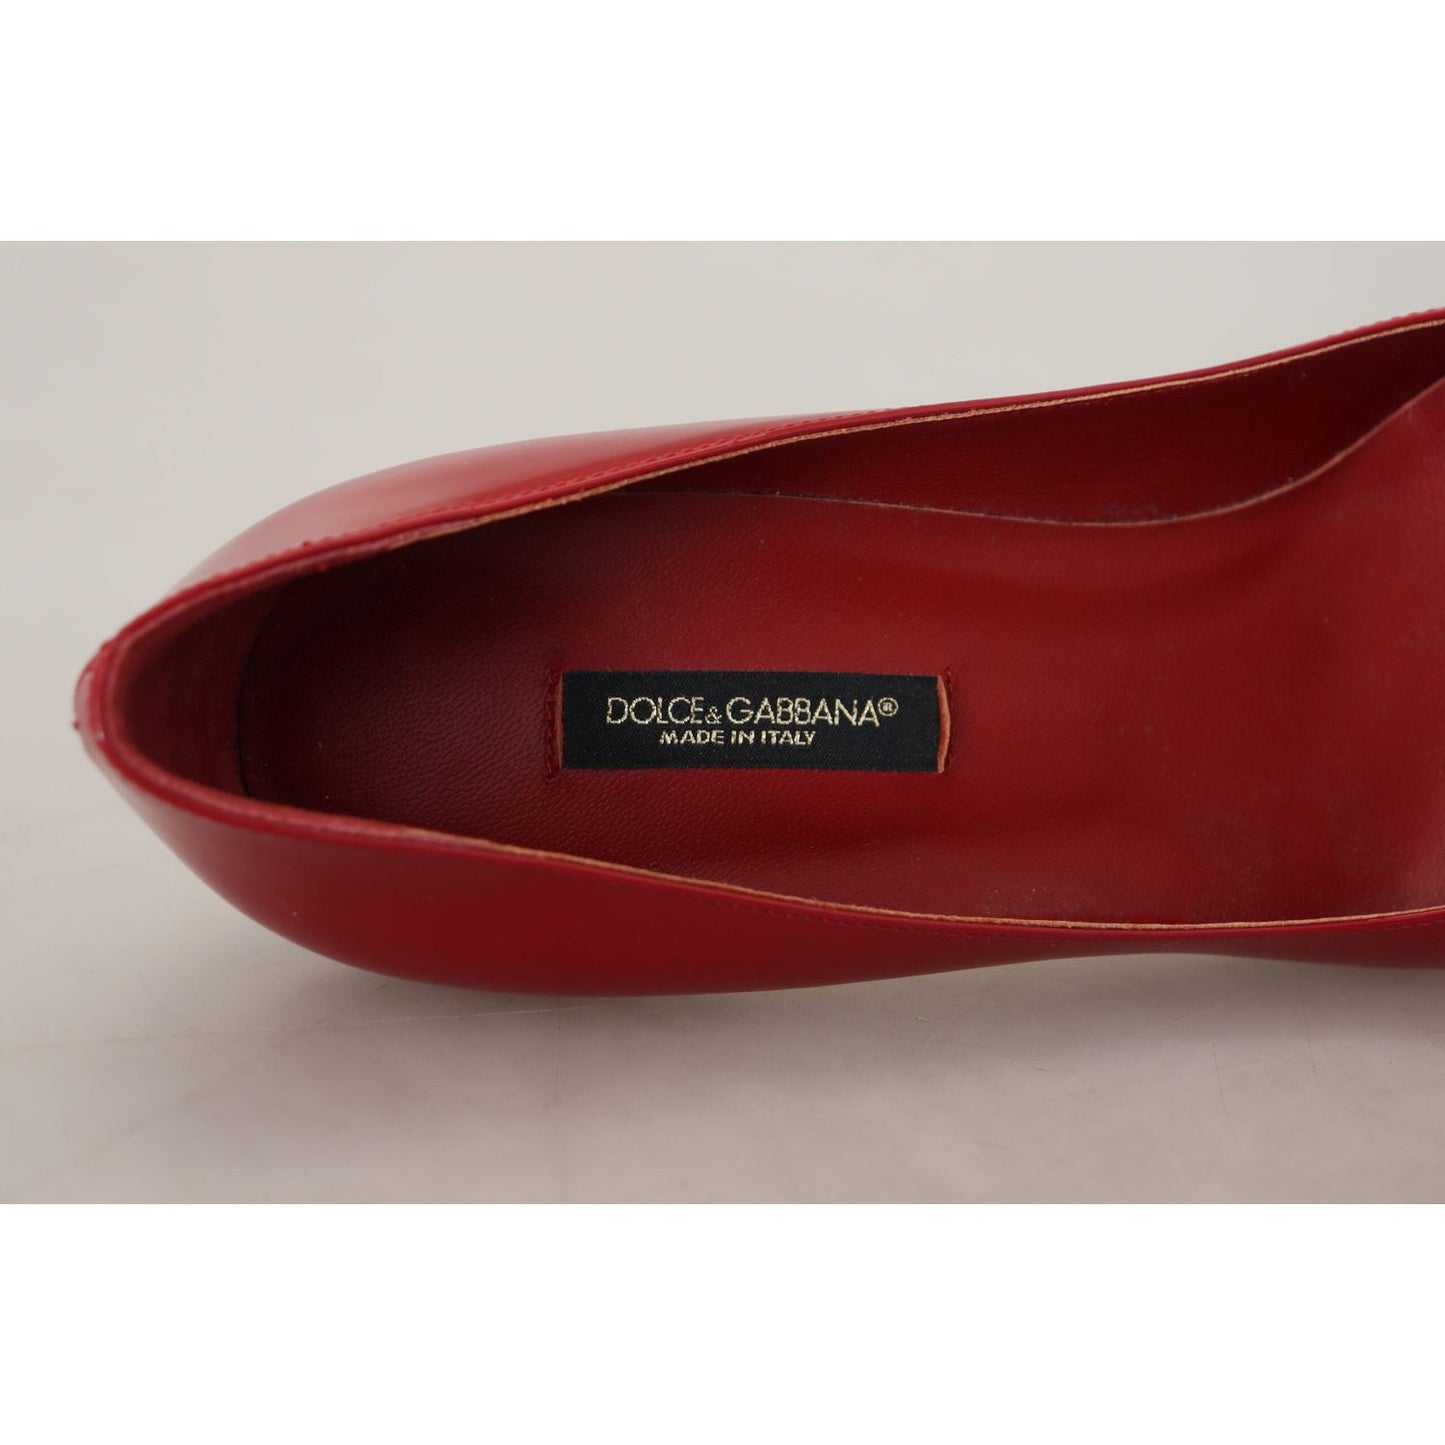 Dolce & Gabbana Exquisite Red Patent Leather Pumps red-patent-leather-kitten-heels-pumps-shoes